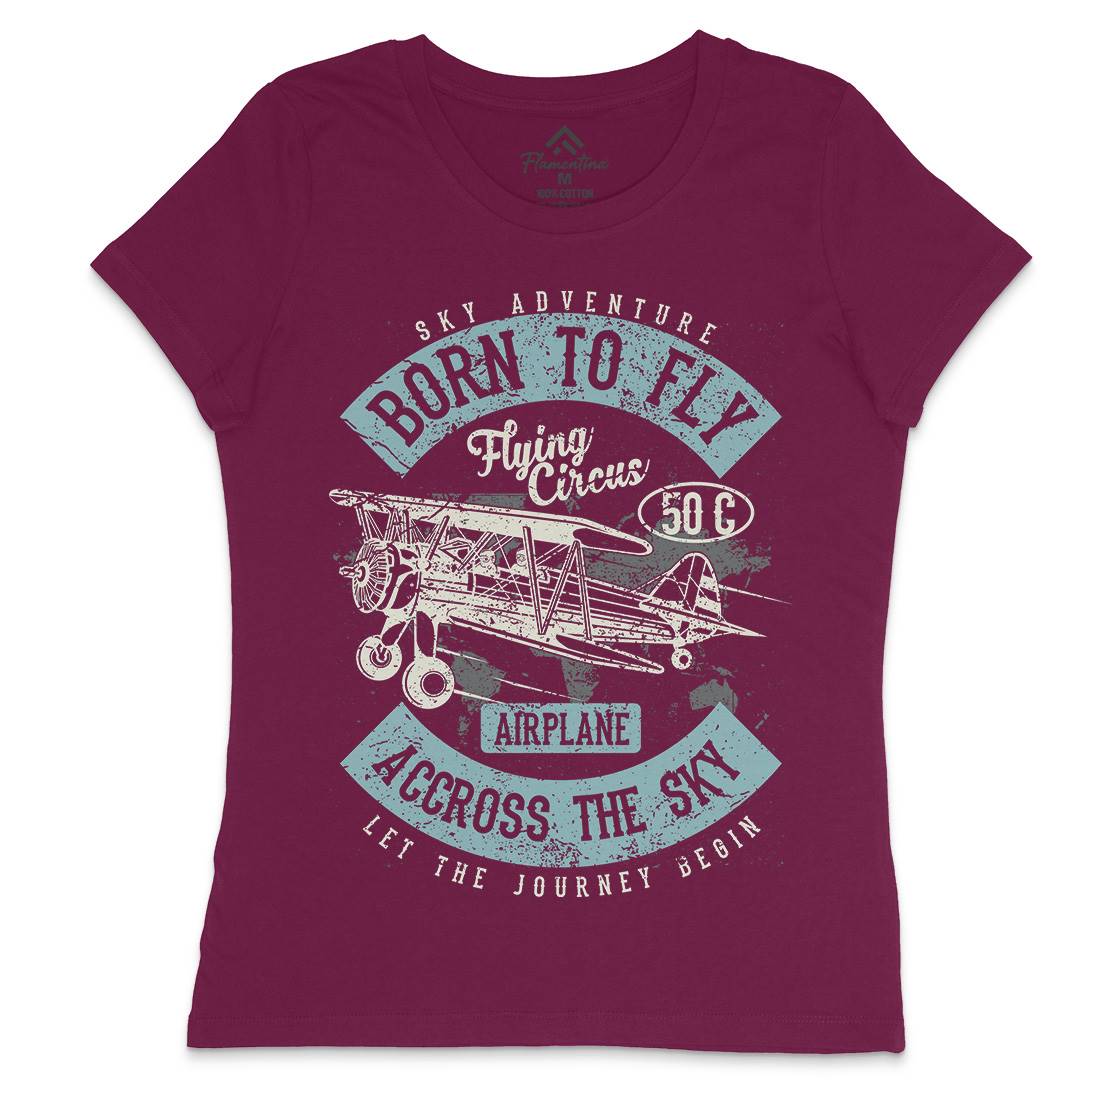 Born To Fly Womens Crew Neck T-Shirt Vehicles A019